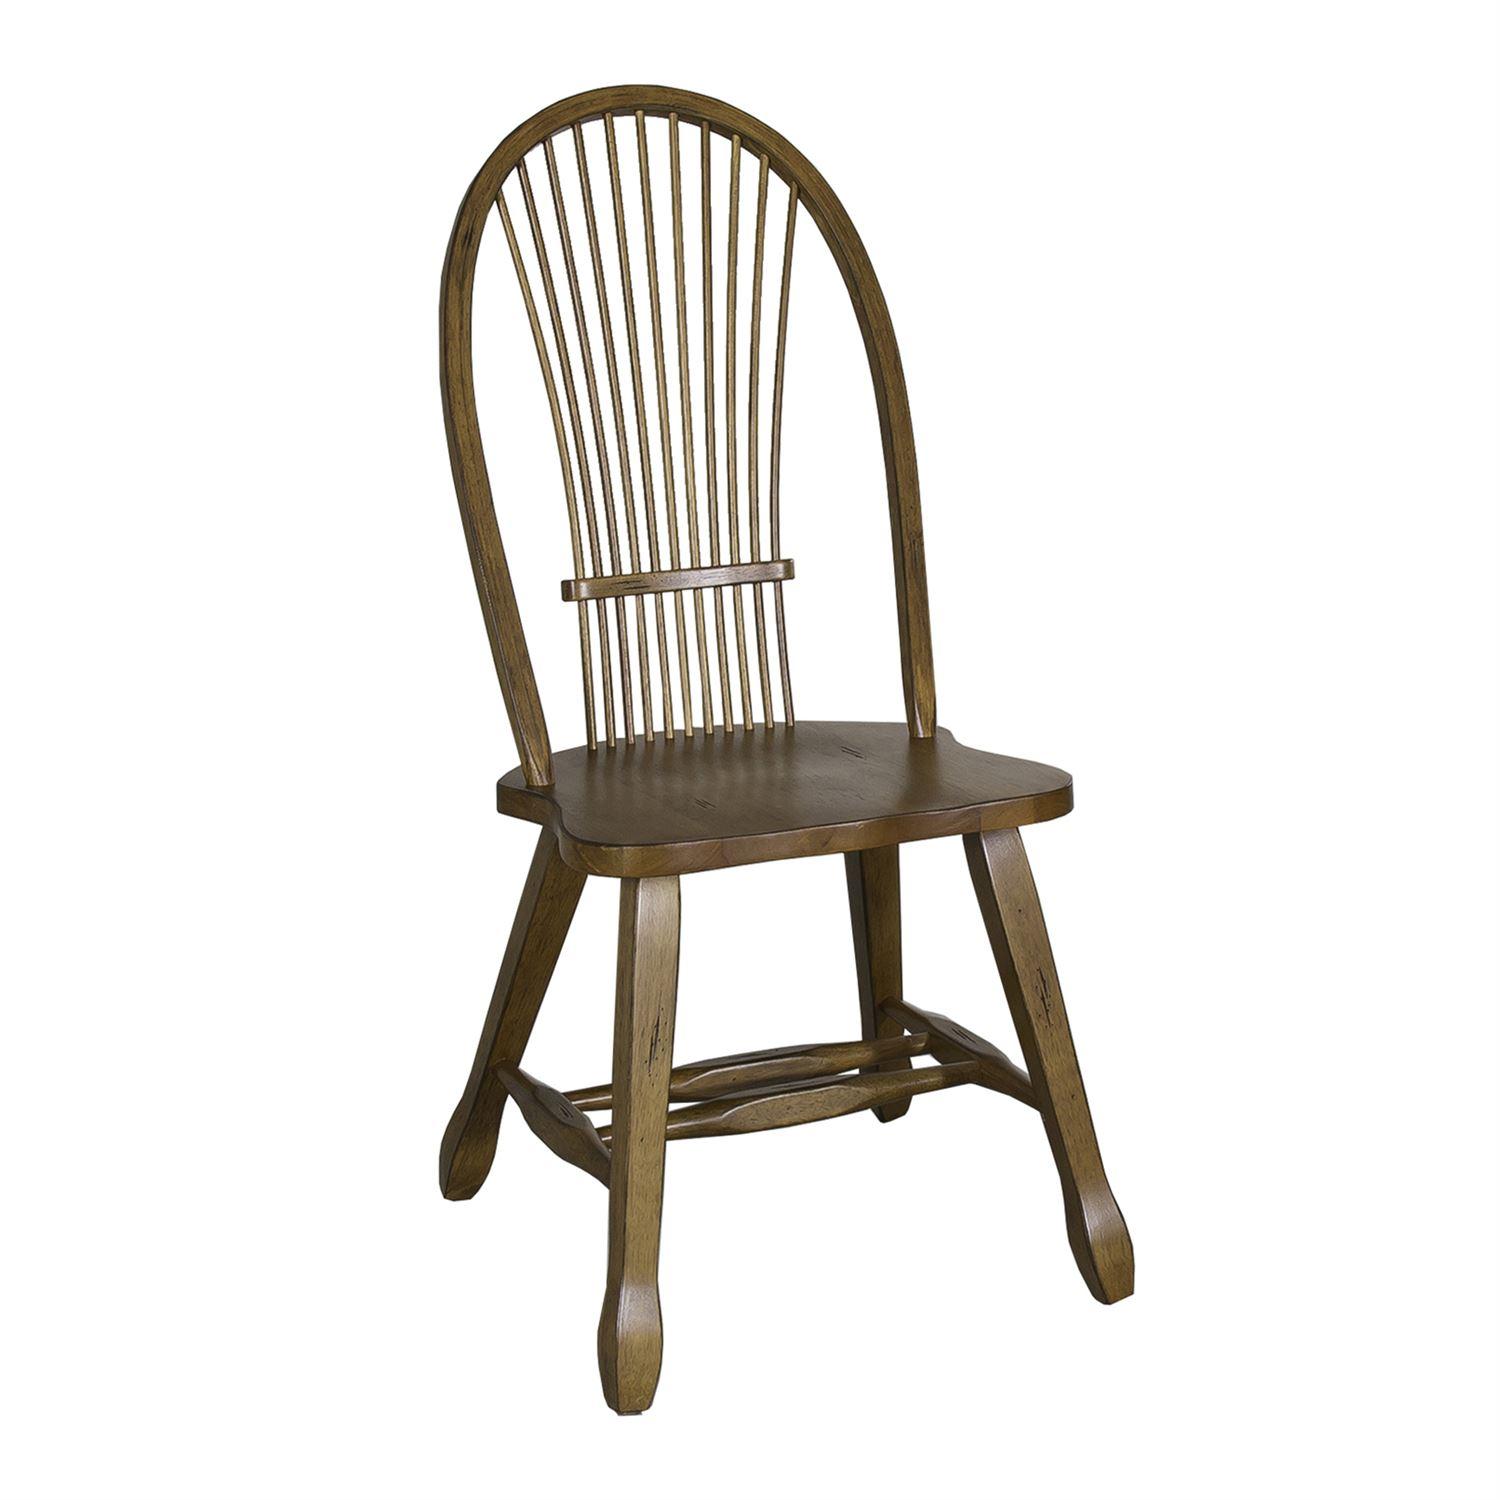   Treasures  (17-CD) Dining Side Chair  